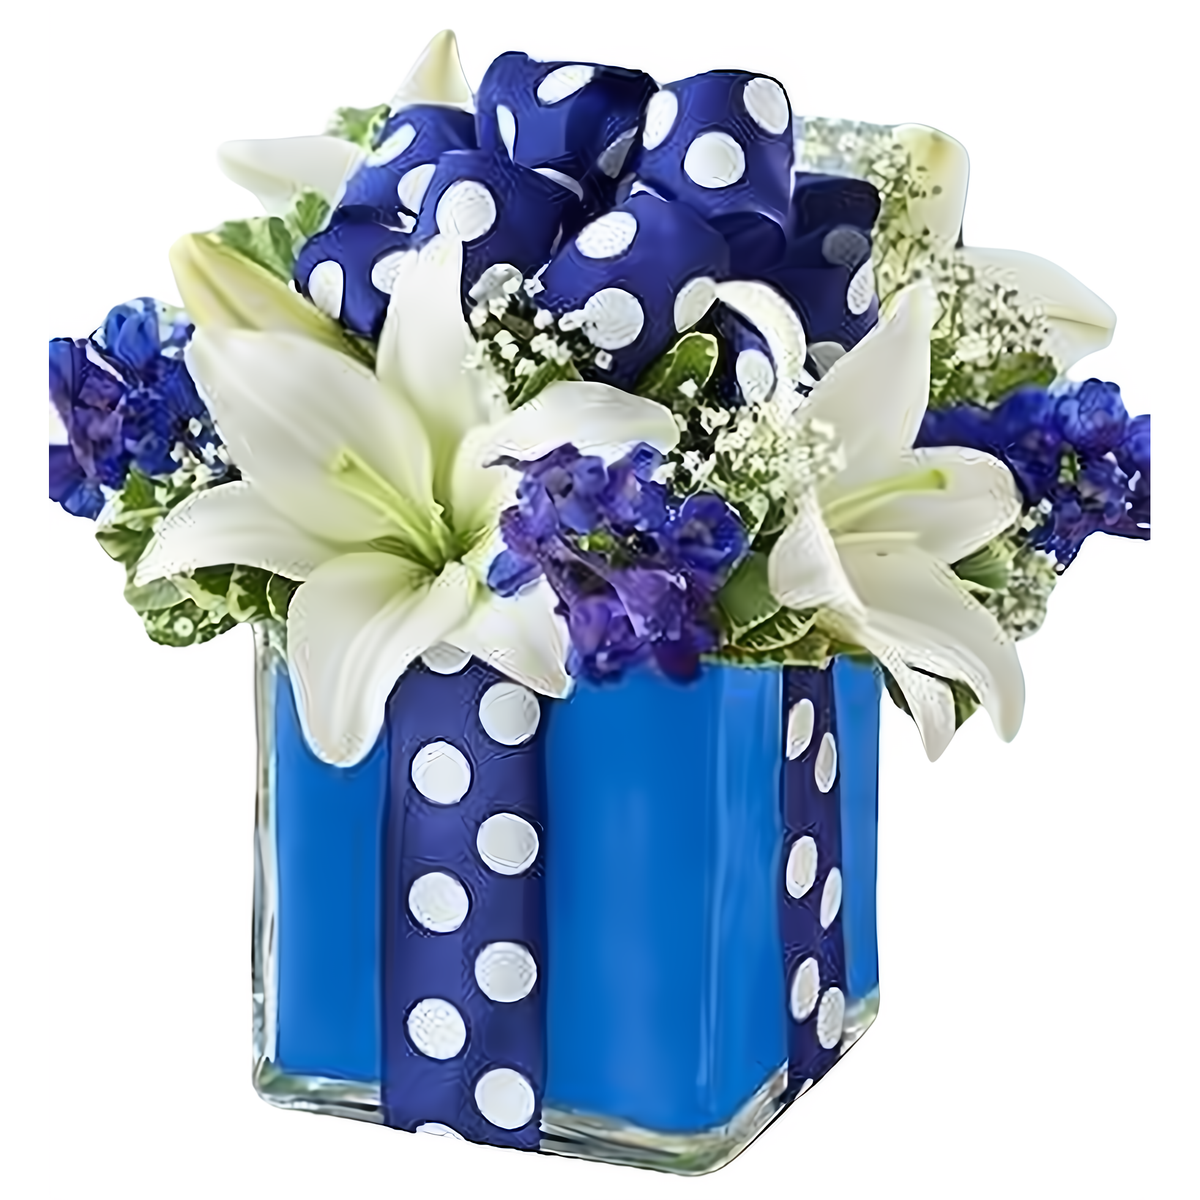 Manhattan Flower Delivery - All Wrapped Up - Blue - Birthdays